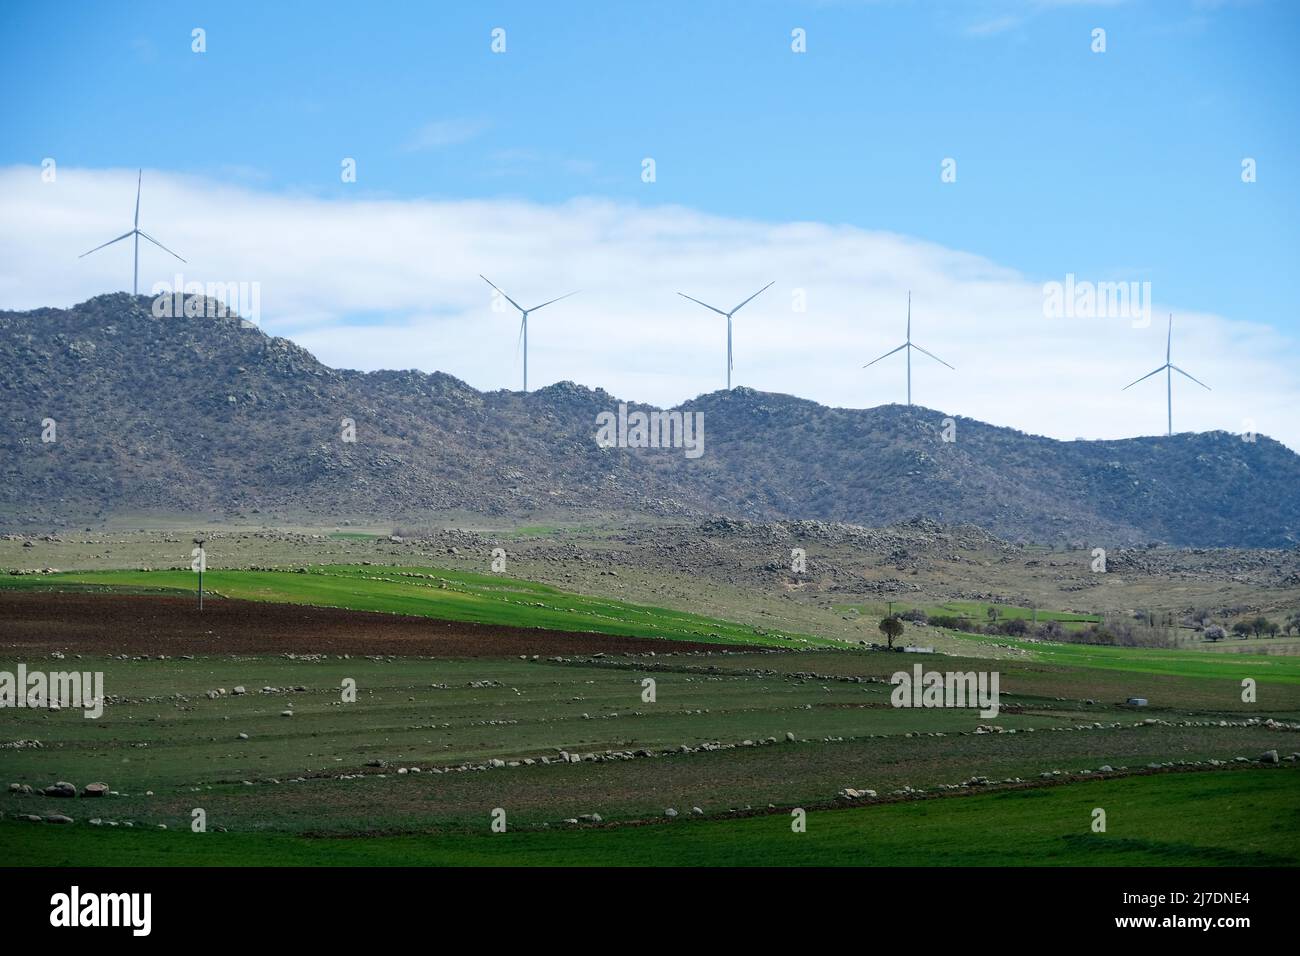 windmills generating electricity on farmlands and hills ahead. Stock Photo